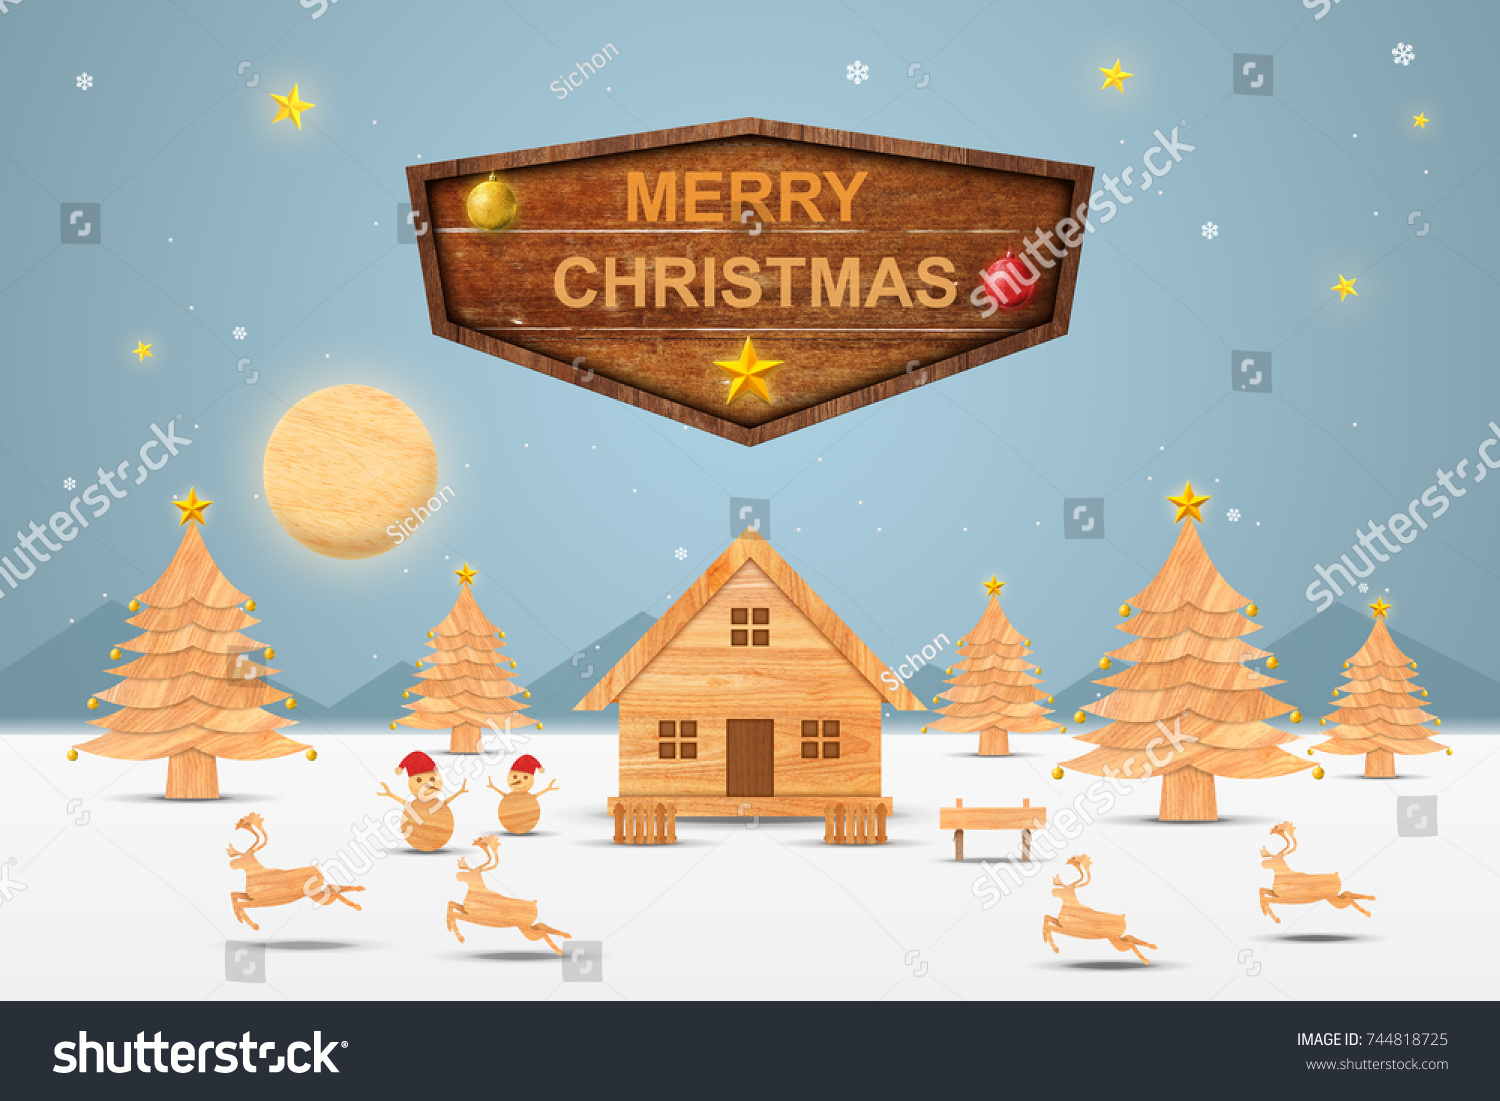 Christmas season and Happy new year season made from wood with decorations art and craft style